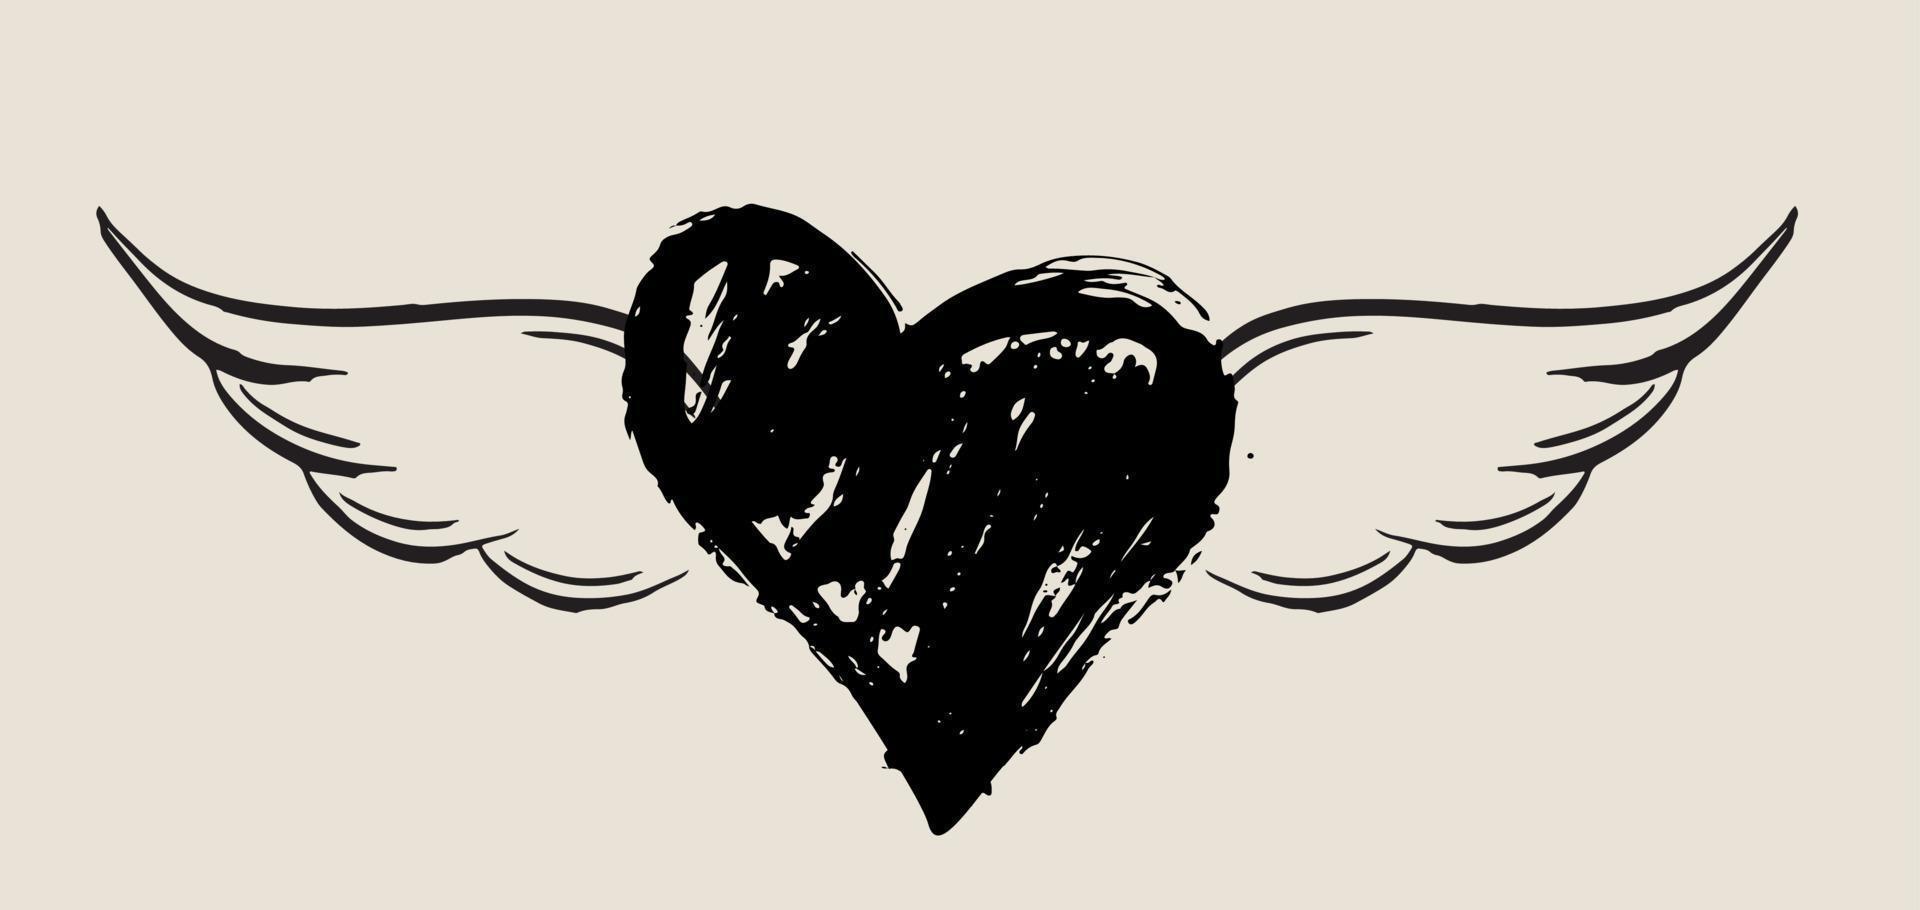 Heart with angel wings, hand drawn. vector